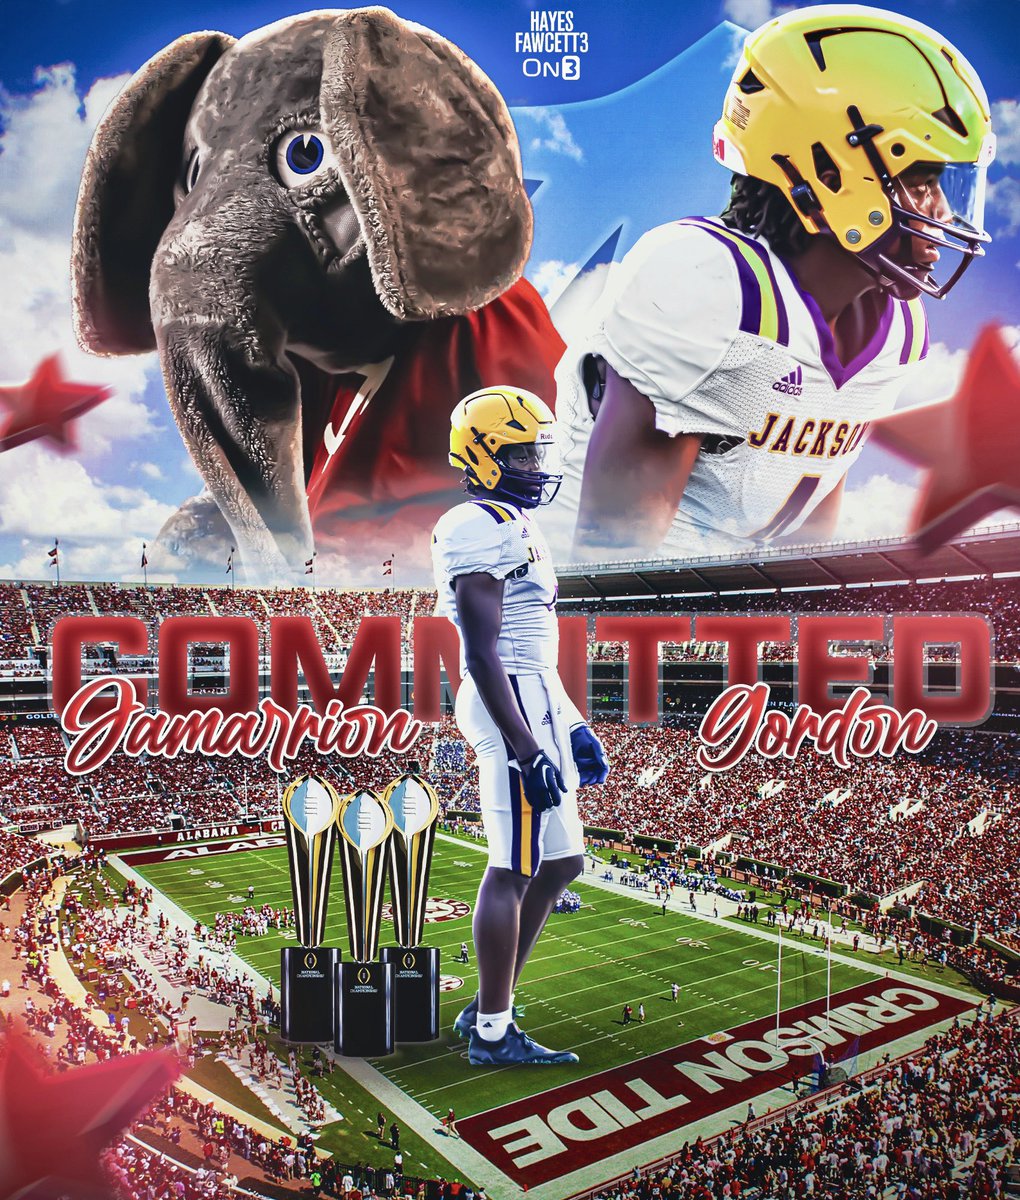 BREAKING: Four-Star CB Jamarrion Gordon (2026) has Committed to Alabama, he tells me for @on3recruits The 6’0 190 CB from Jackson, AL chose the Crimson Tide over Miami & LSU “This decision was a no brainer. I needed to stay home and make this state better.”